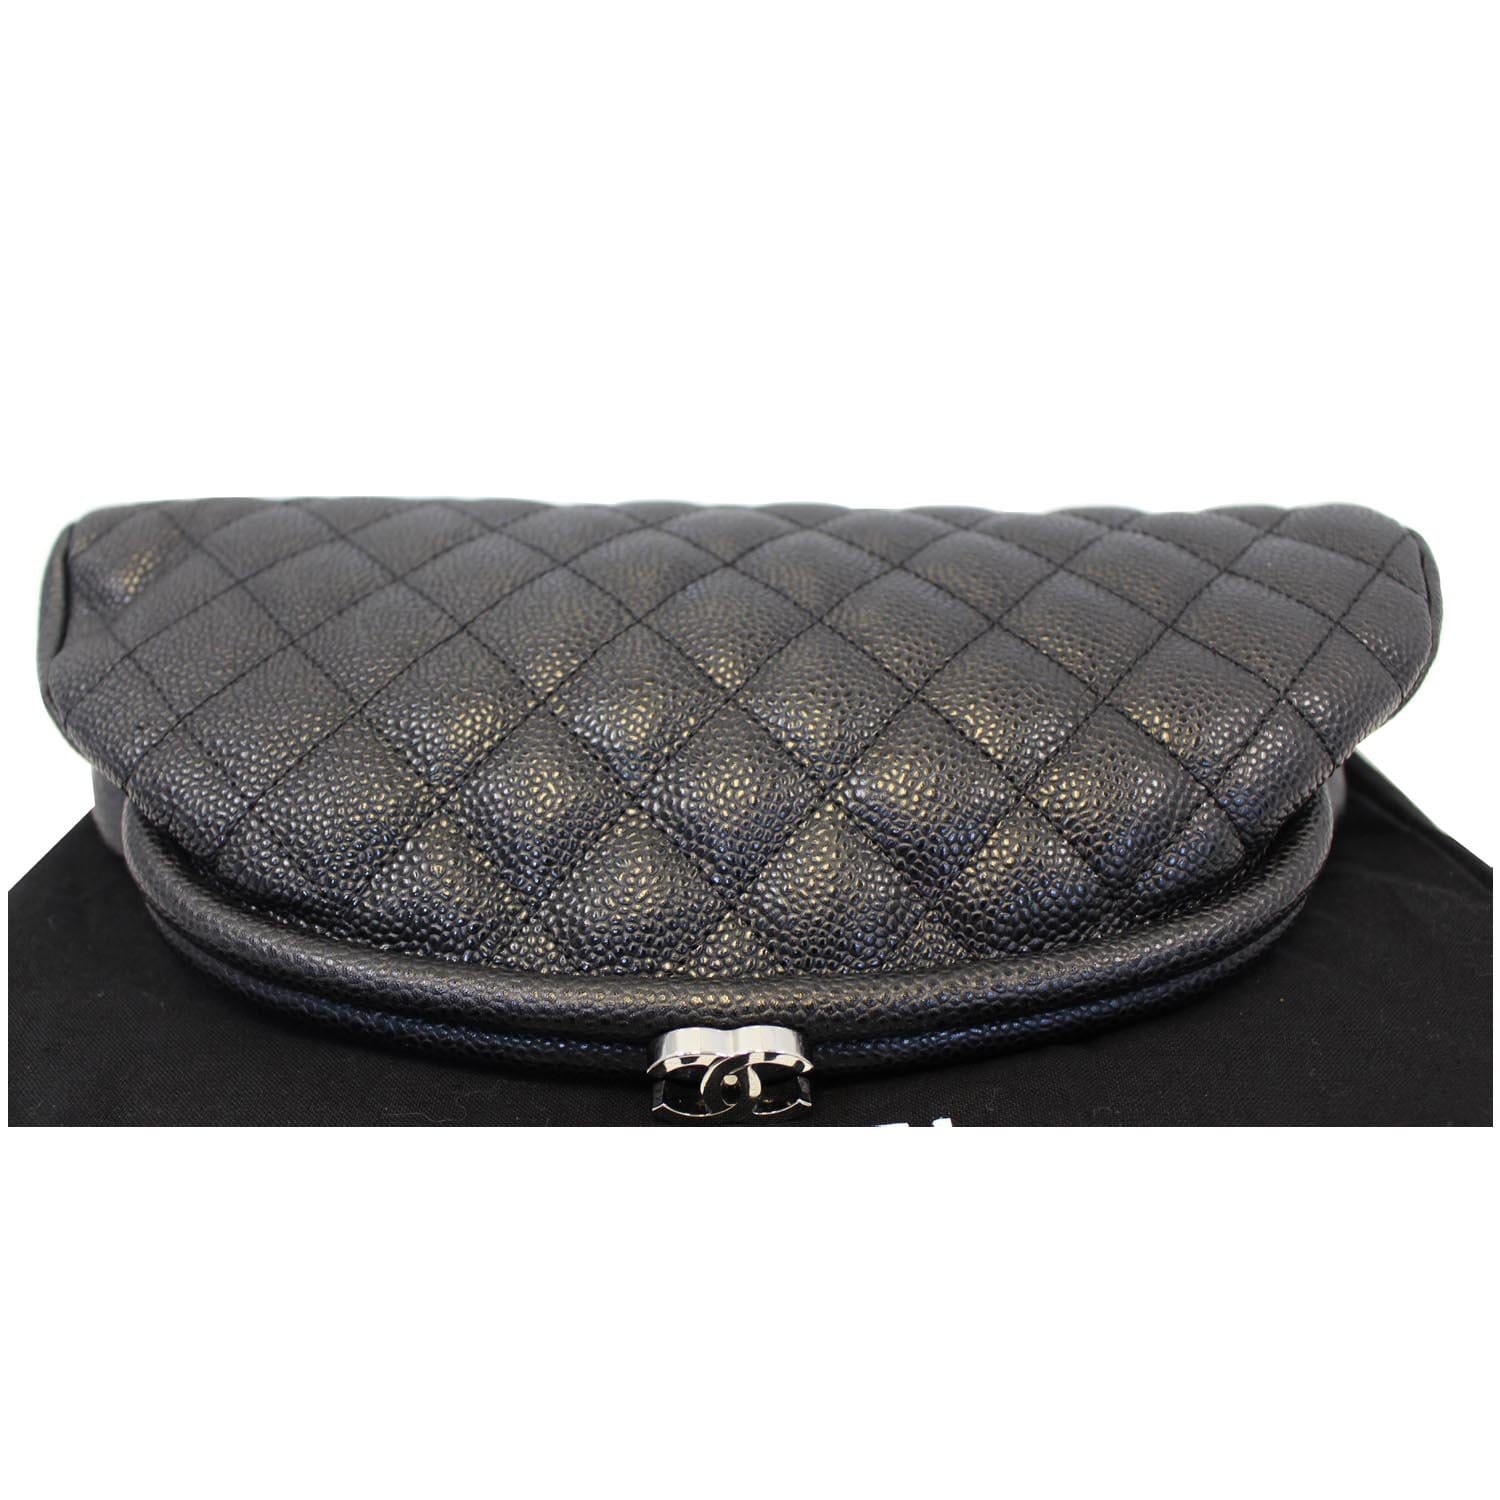 CHANEL Timeless Caviar Quilted Leather Clutch Black-US